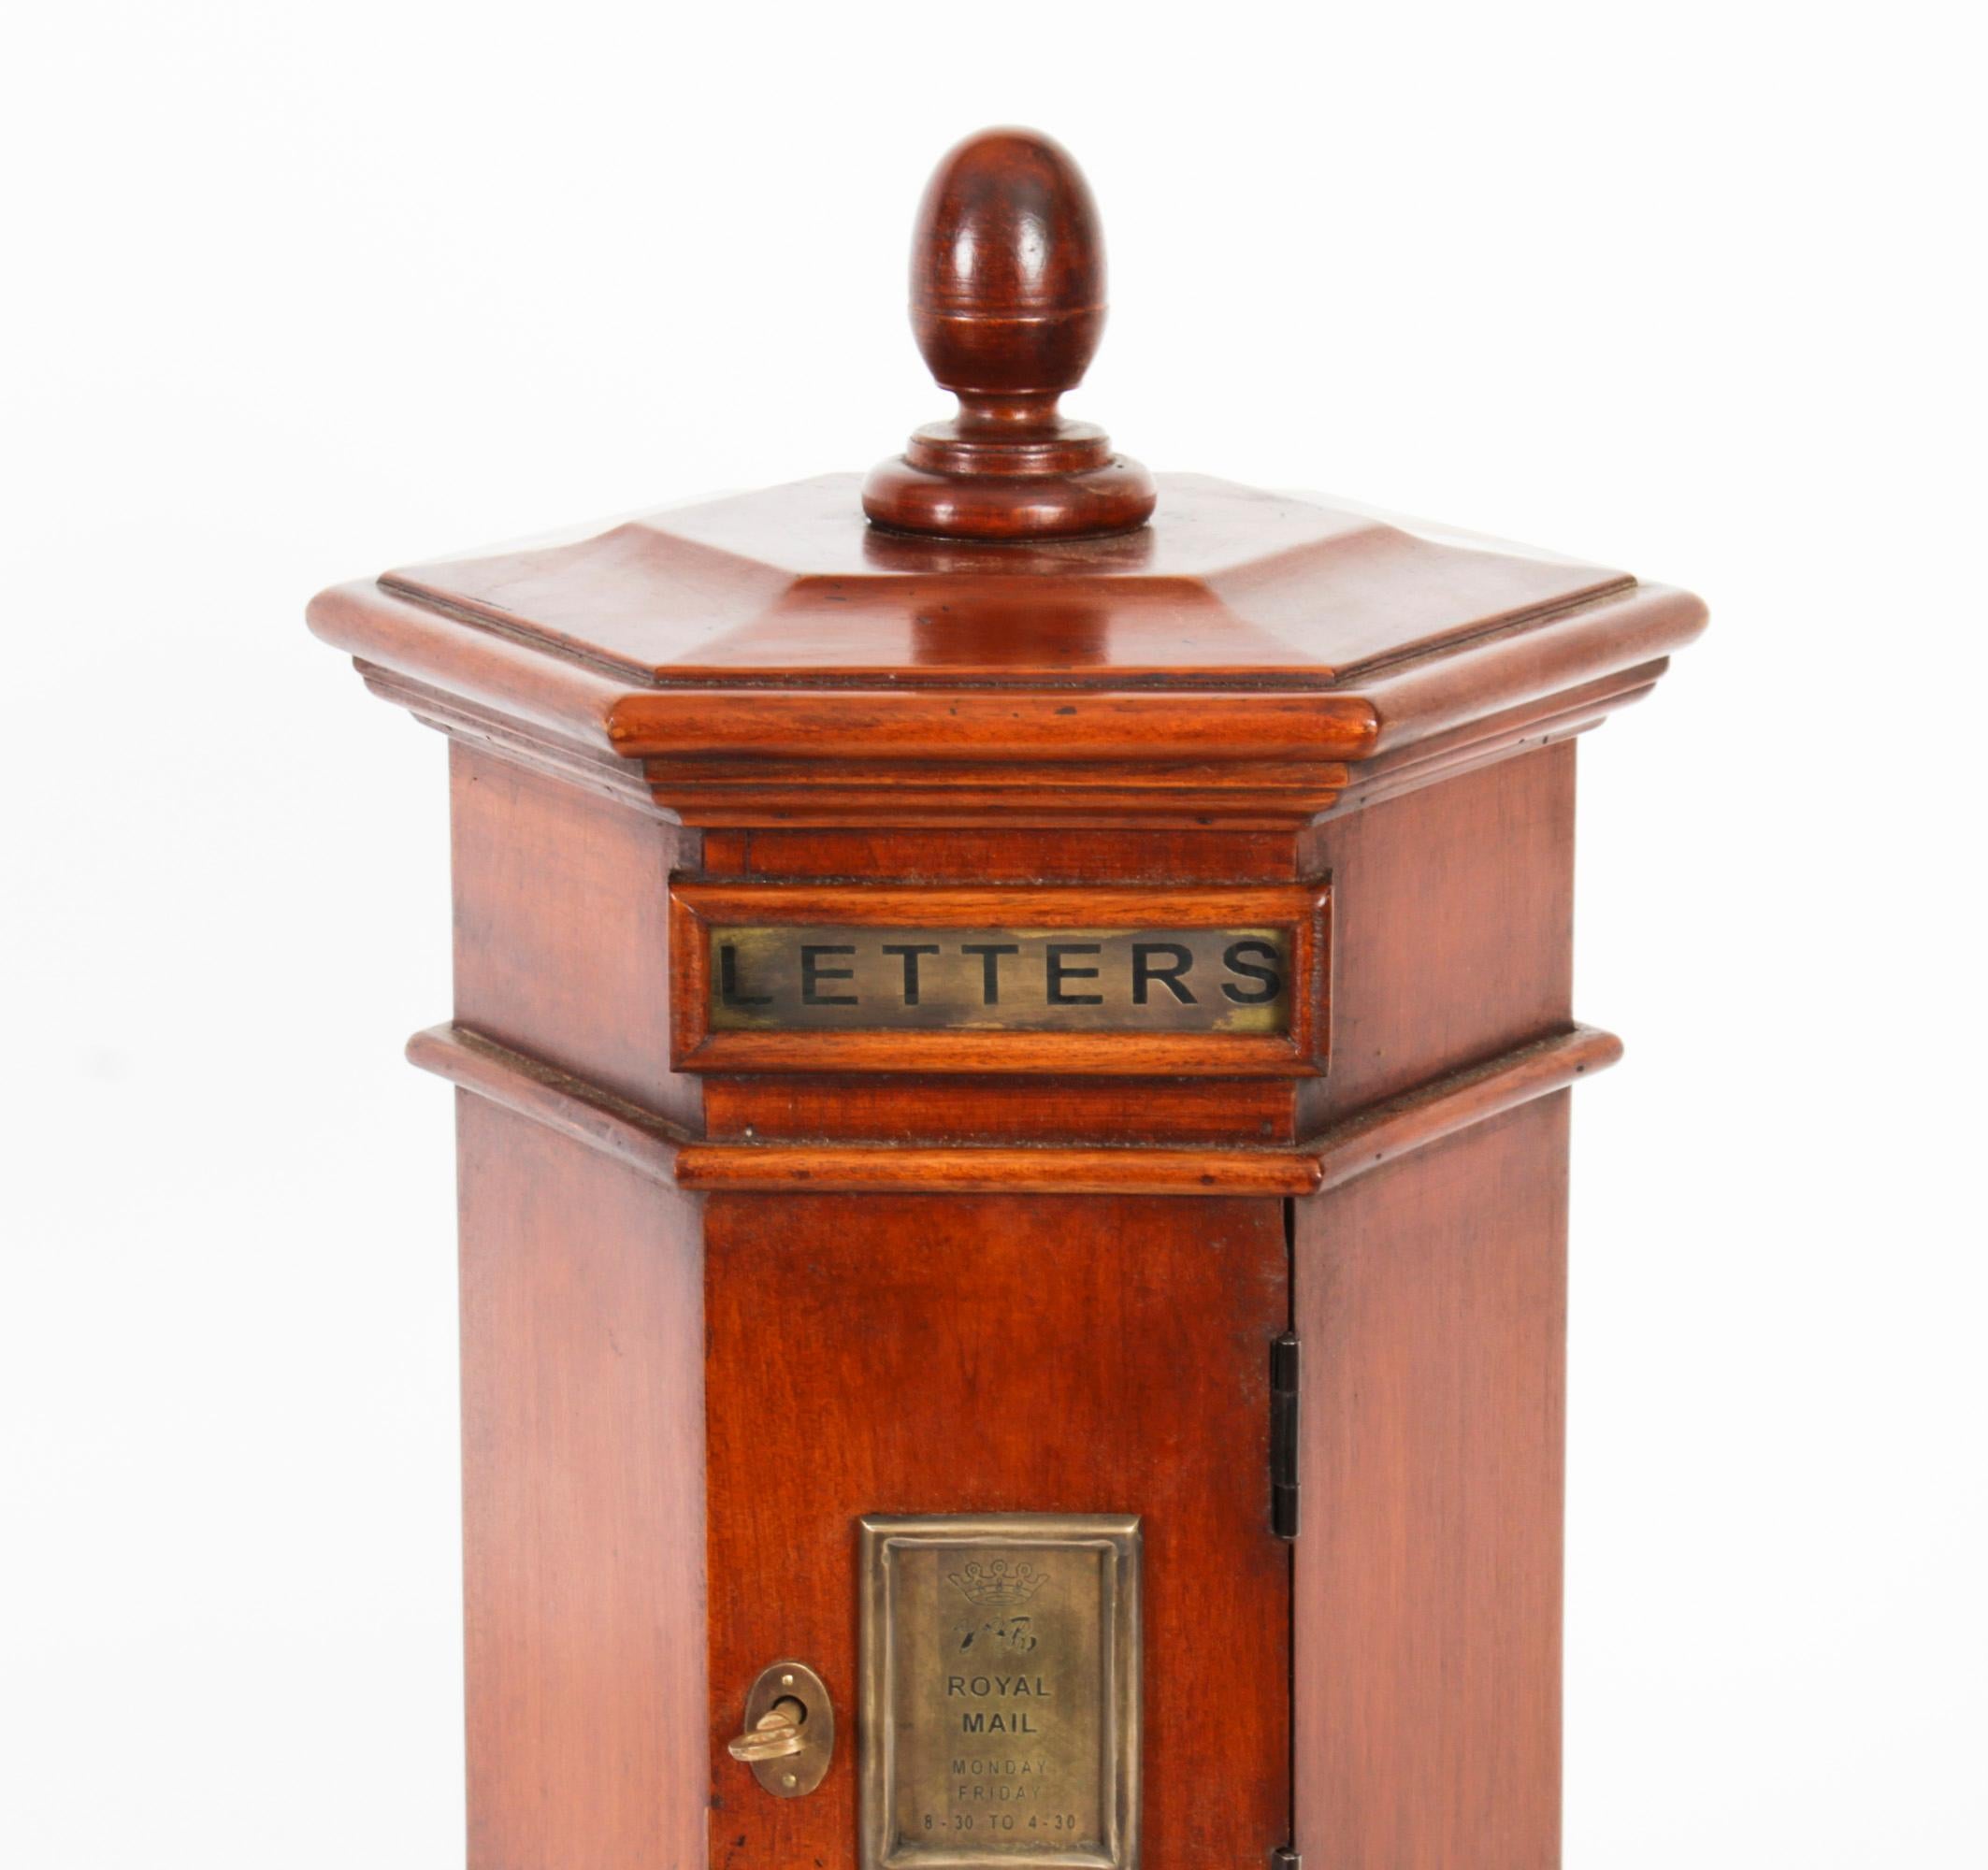 This is a beautiful vintage country house pillar post letter box, dating from the second half of the 20th century.

The hexagonal shaped solid walnut country house pillar post letter box features a superbly hand carved acorn finial above a brass